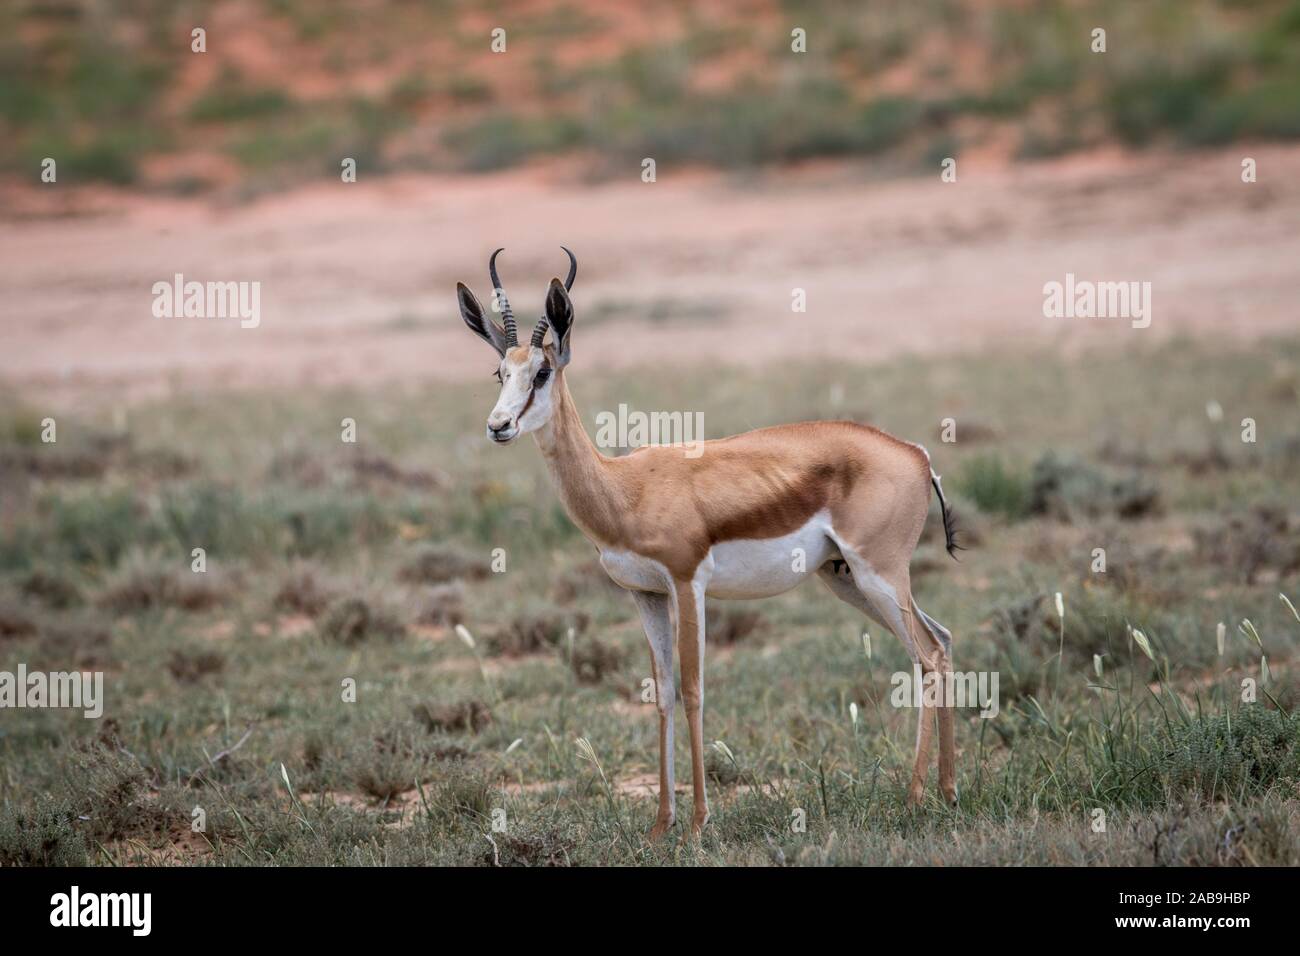 Starring Springbok in the Kgalagadi Transfrontier Park, South Africa. Stock Photo